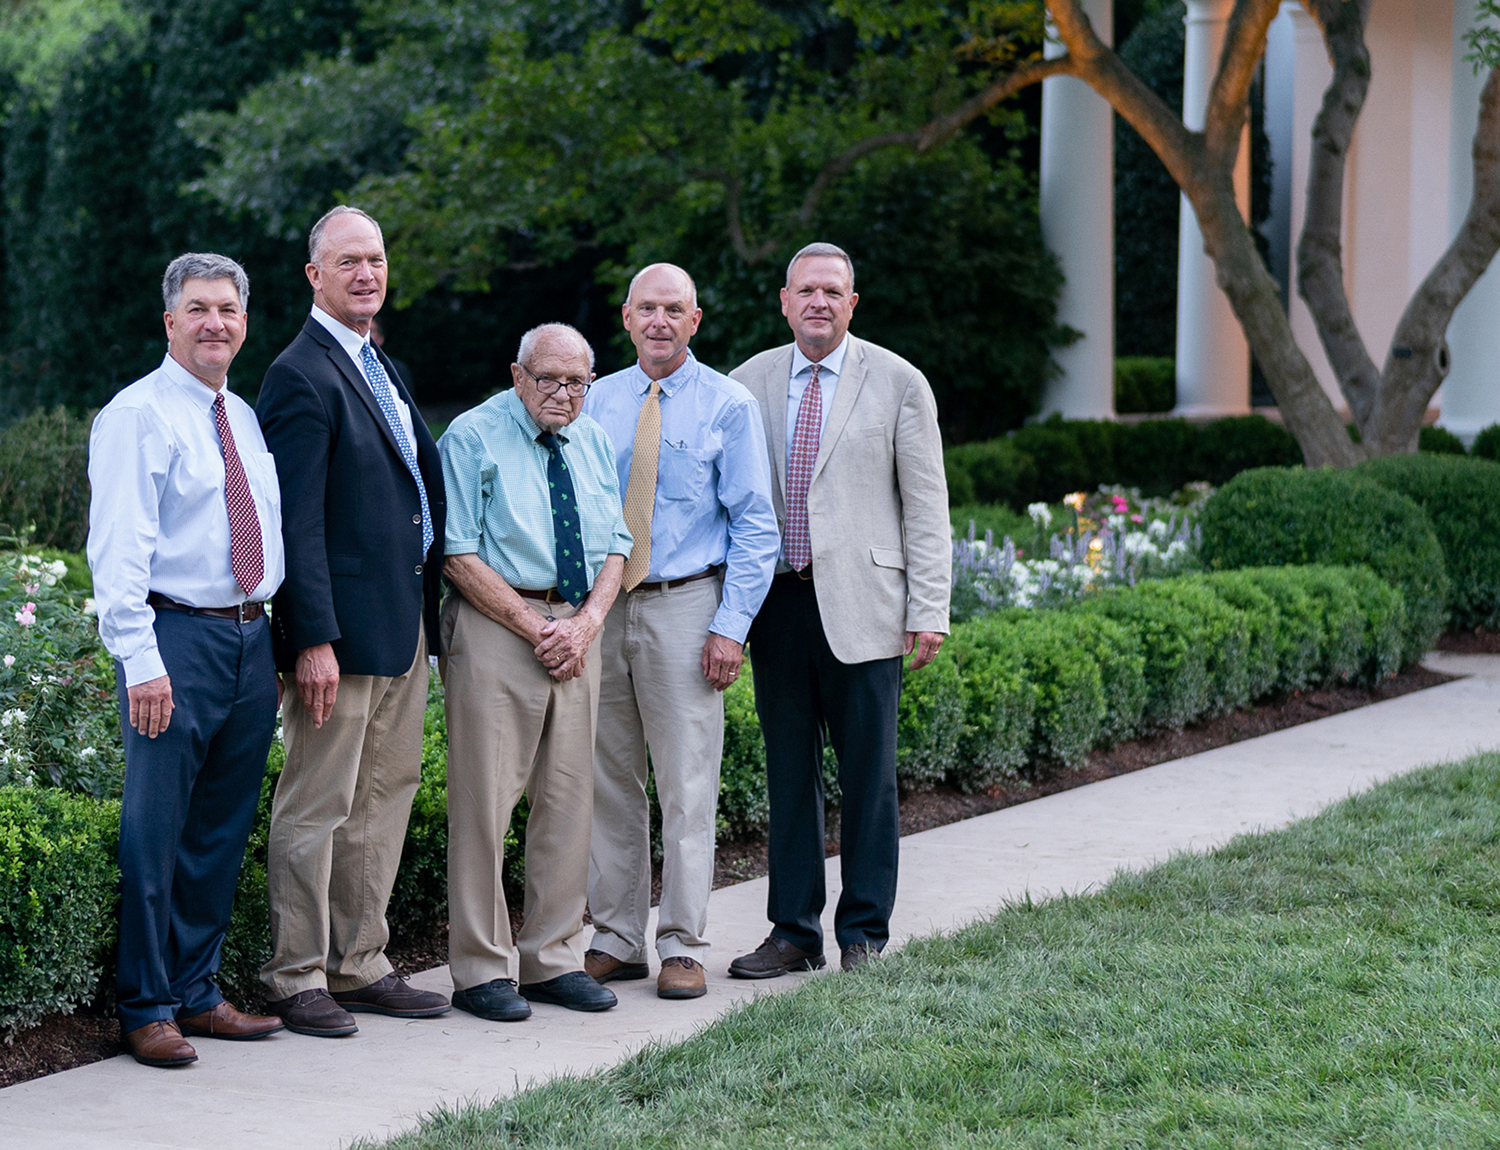 Saunders family attend White House Rose Garden reception L to R: Jim, Tom, Paul, Bennett, and Robert SaundersPhoto by White House Photo Office